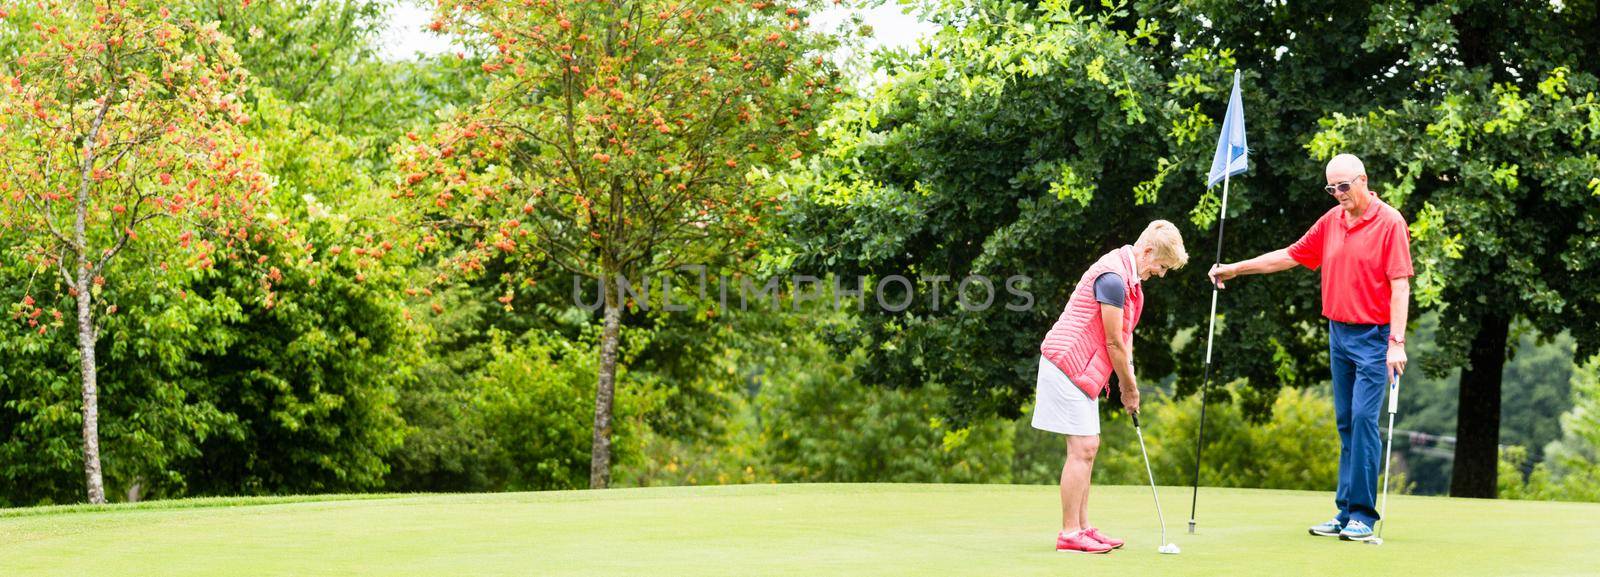 Senior woman and man playing golf putting on green